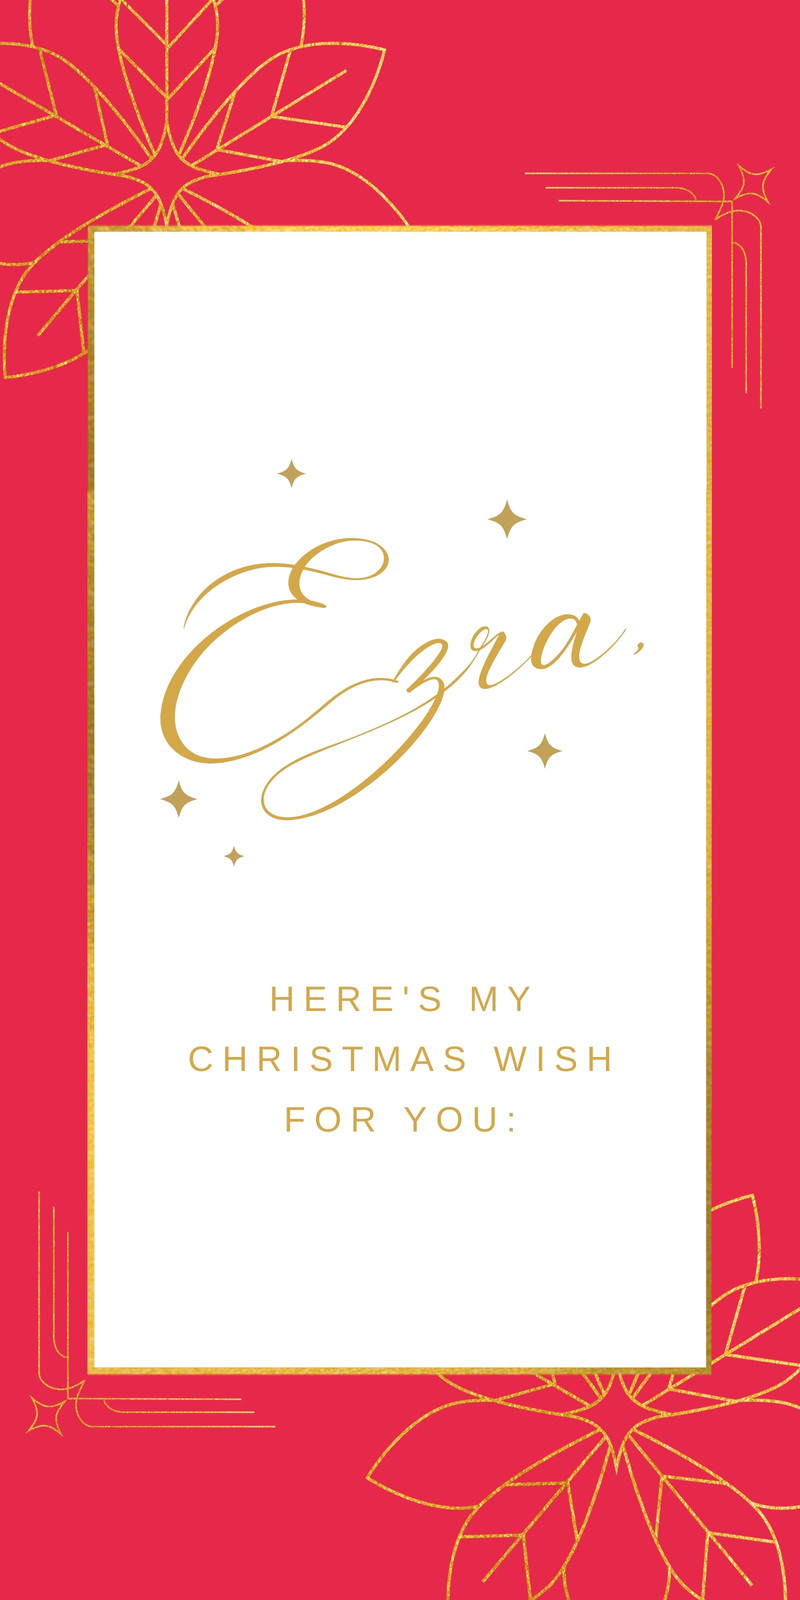 Red Maroon White and Gold Classy and Elegant Personal Christmas Card